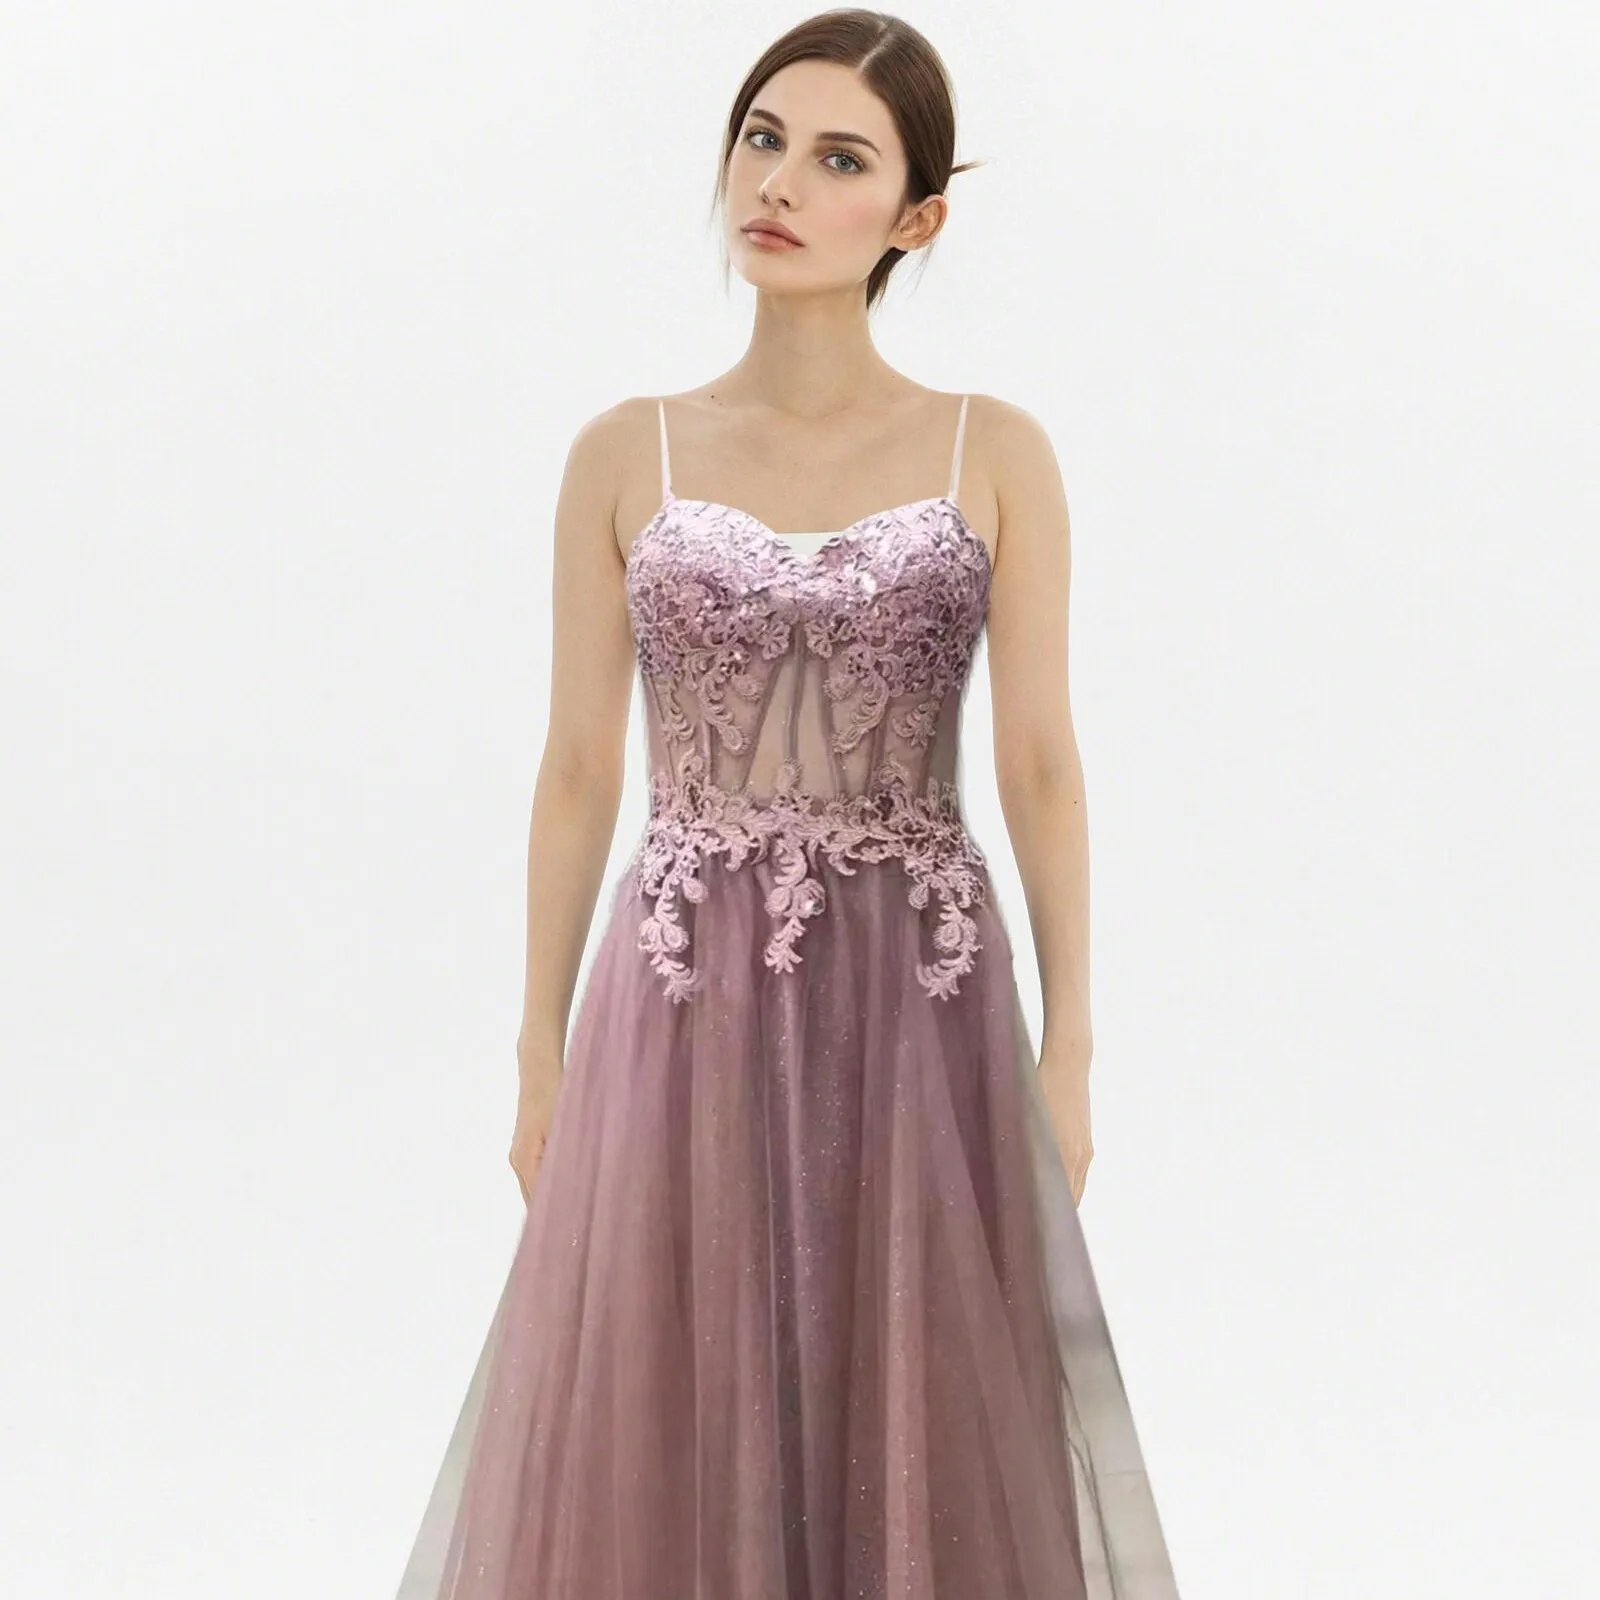 Mauve embroidered A Line Sleeveless Tulle Simple Party Formal Evening Gown Prom Dress